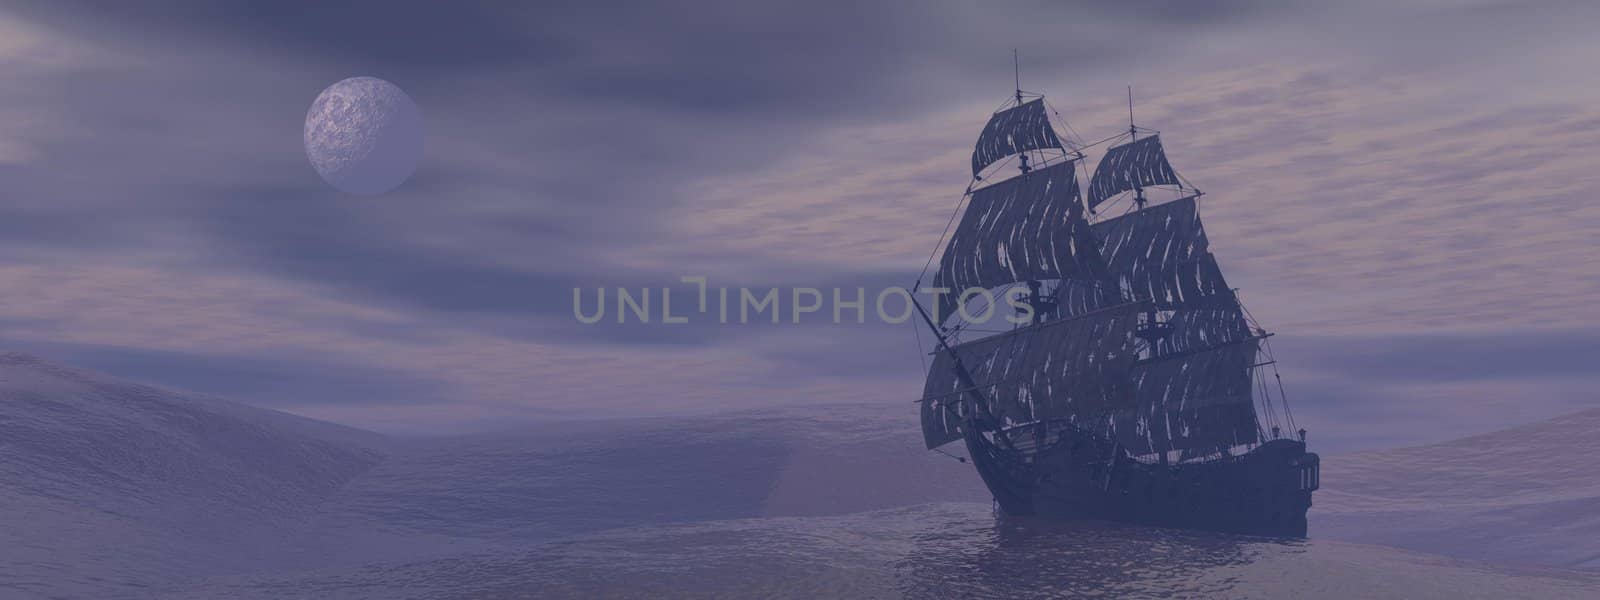 Old ghost boat floating on the ocean by grey foggy night with full moon